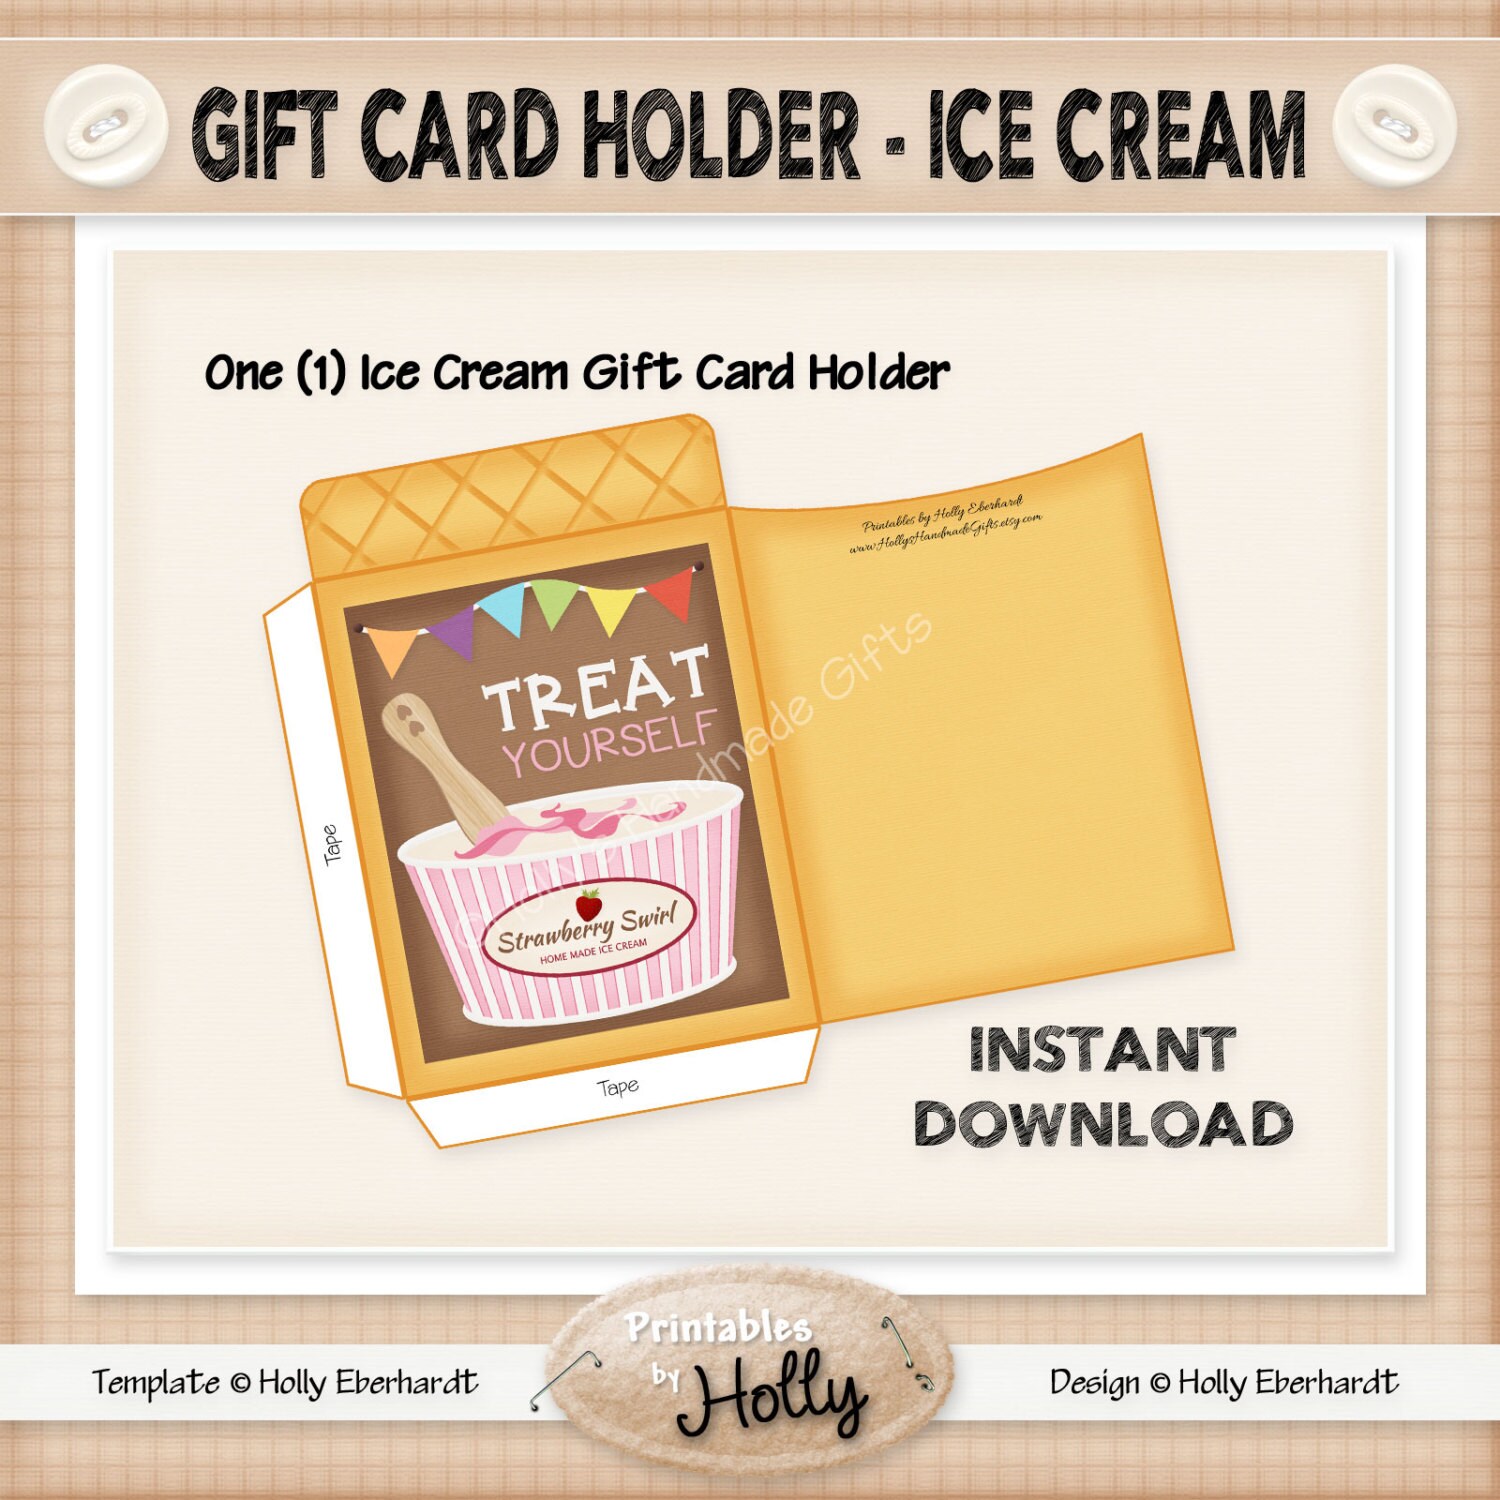 gift-card-holder-ice-cream-instant-download-printable-etsy